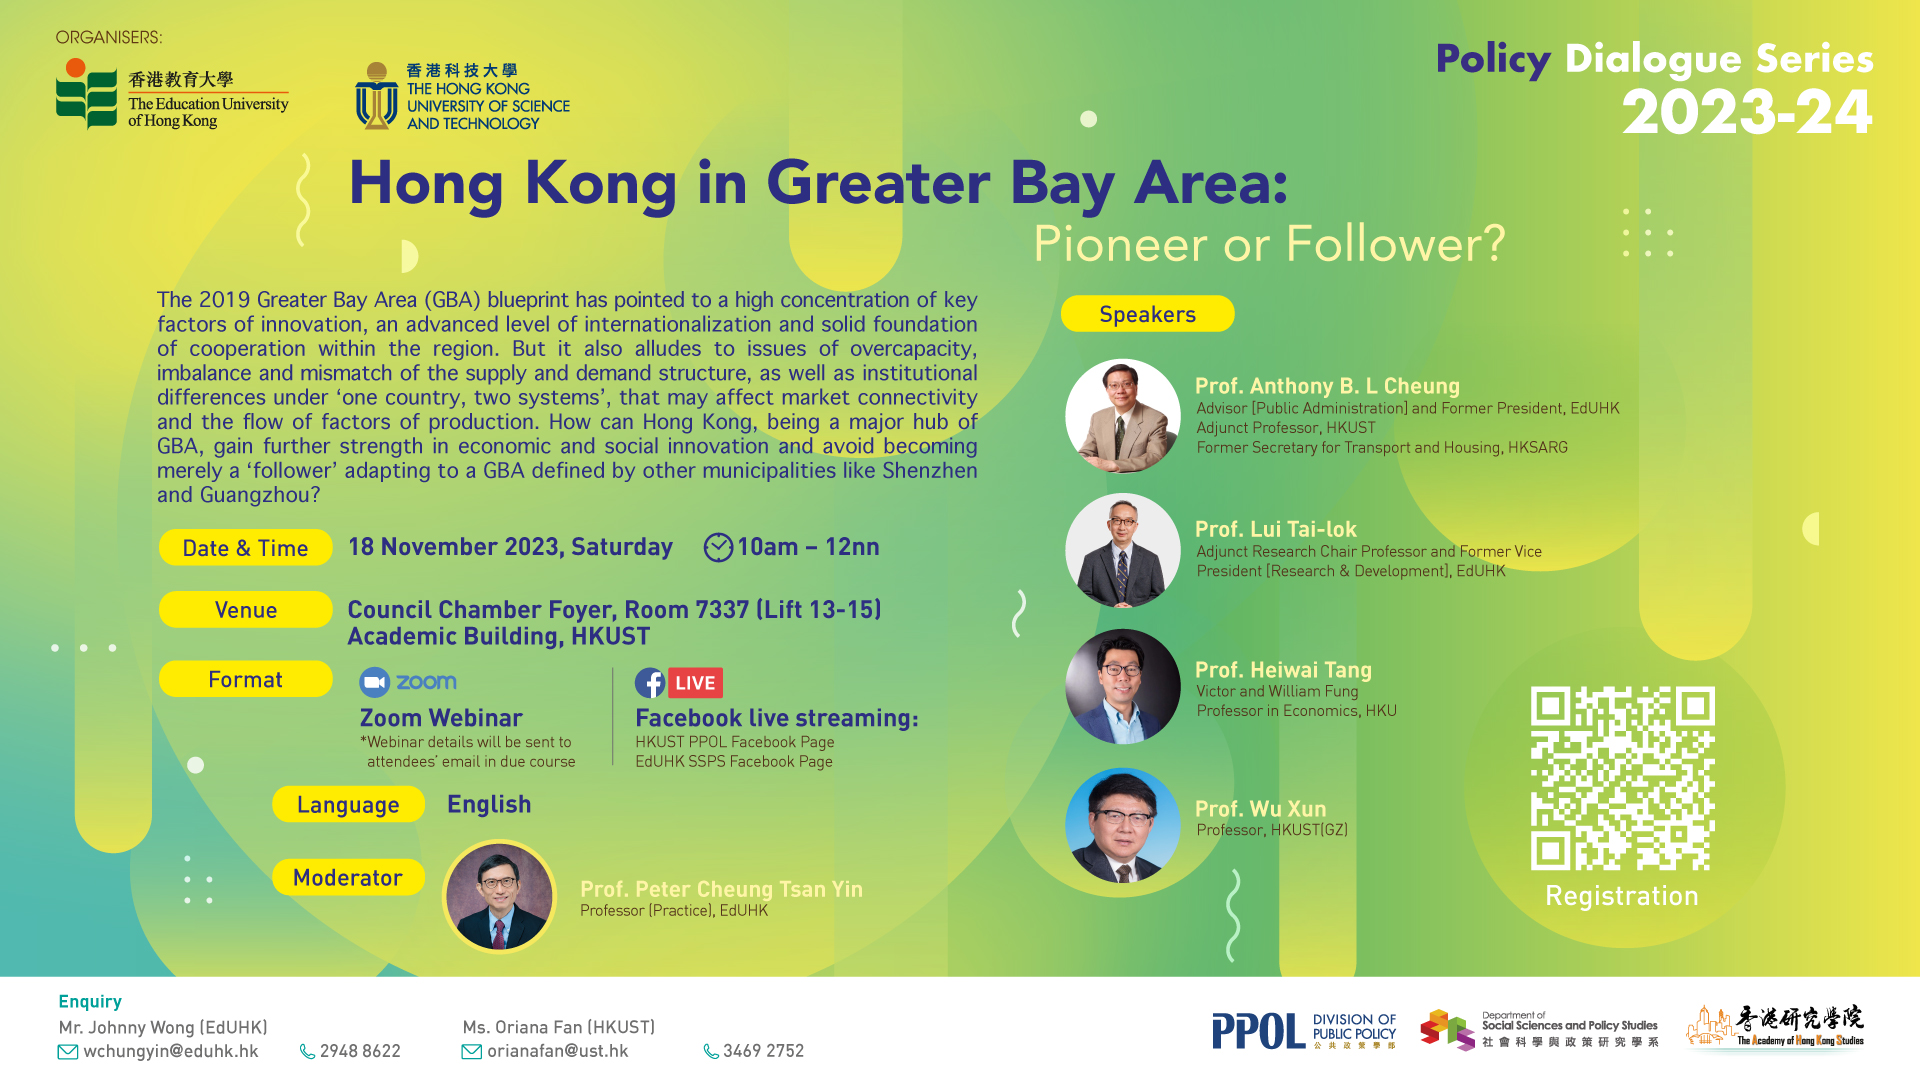 Hong Kong in Greater Bay Area: Pioneer or Follower?